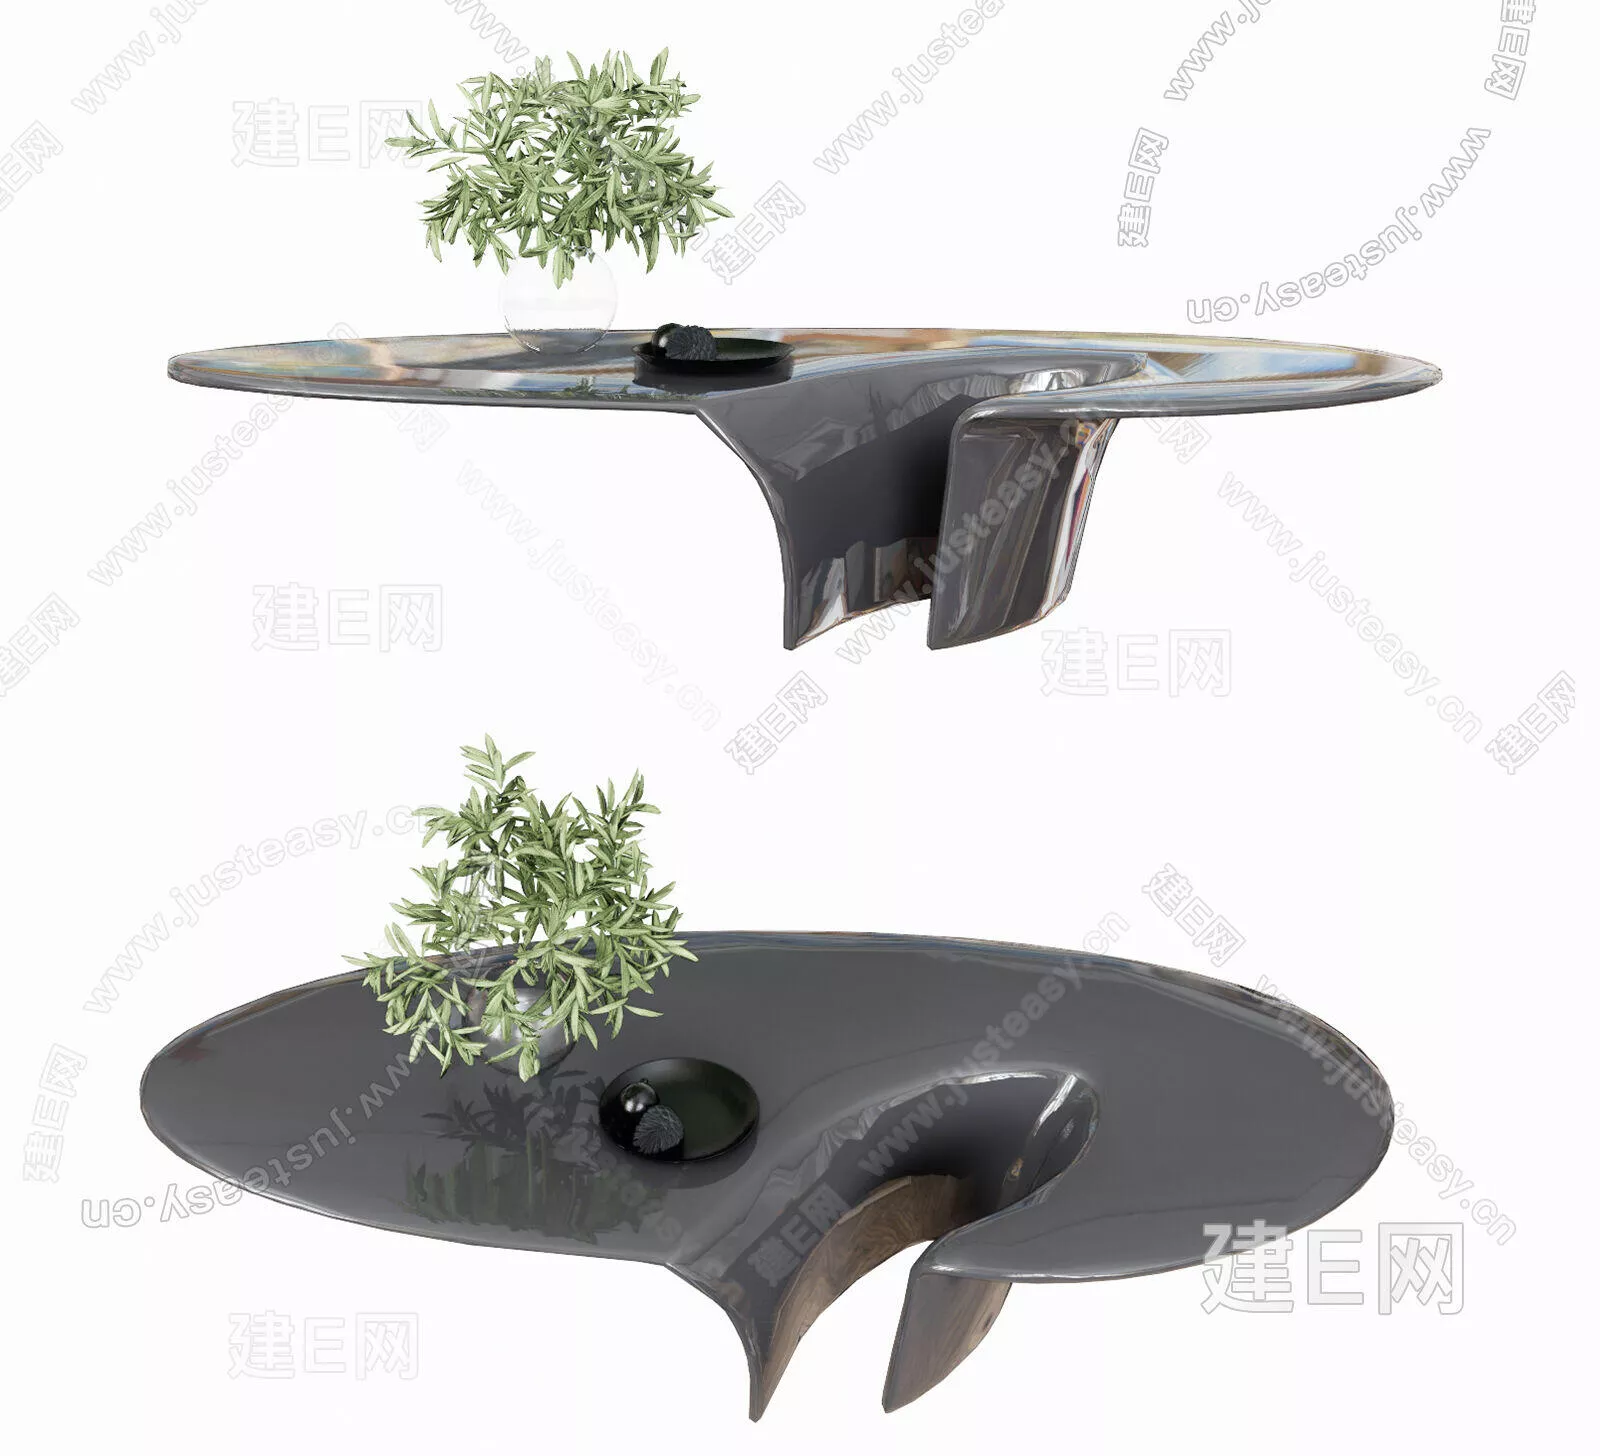 MODERN COFFEE TABLE - SKETCHUP 3D MODEL - ENSCAPE - 115033400